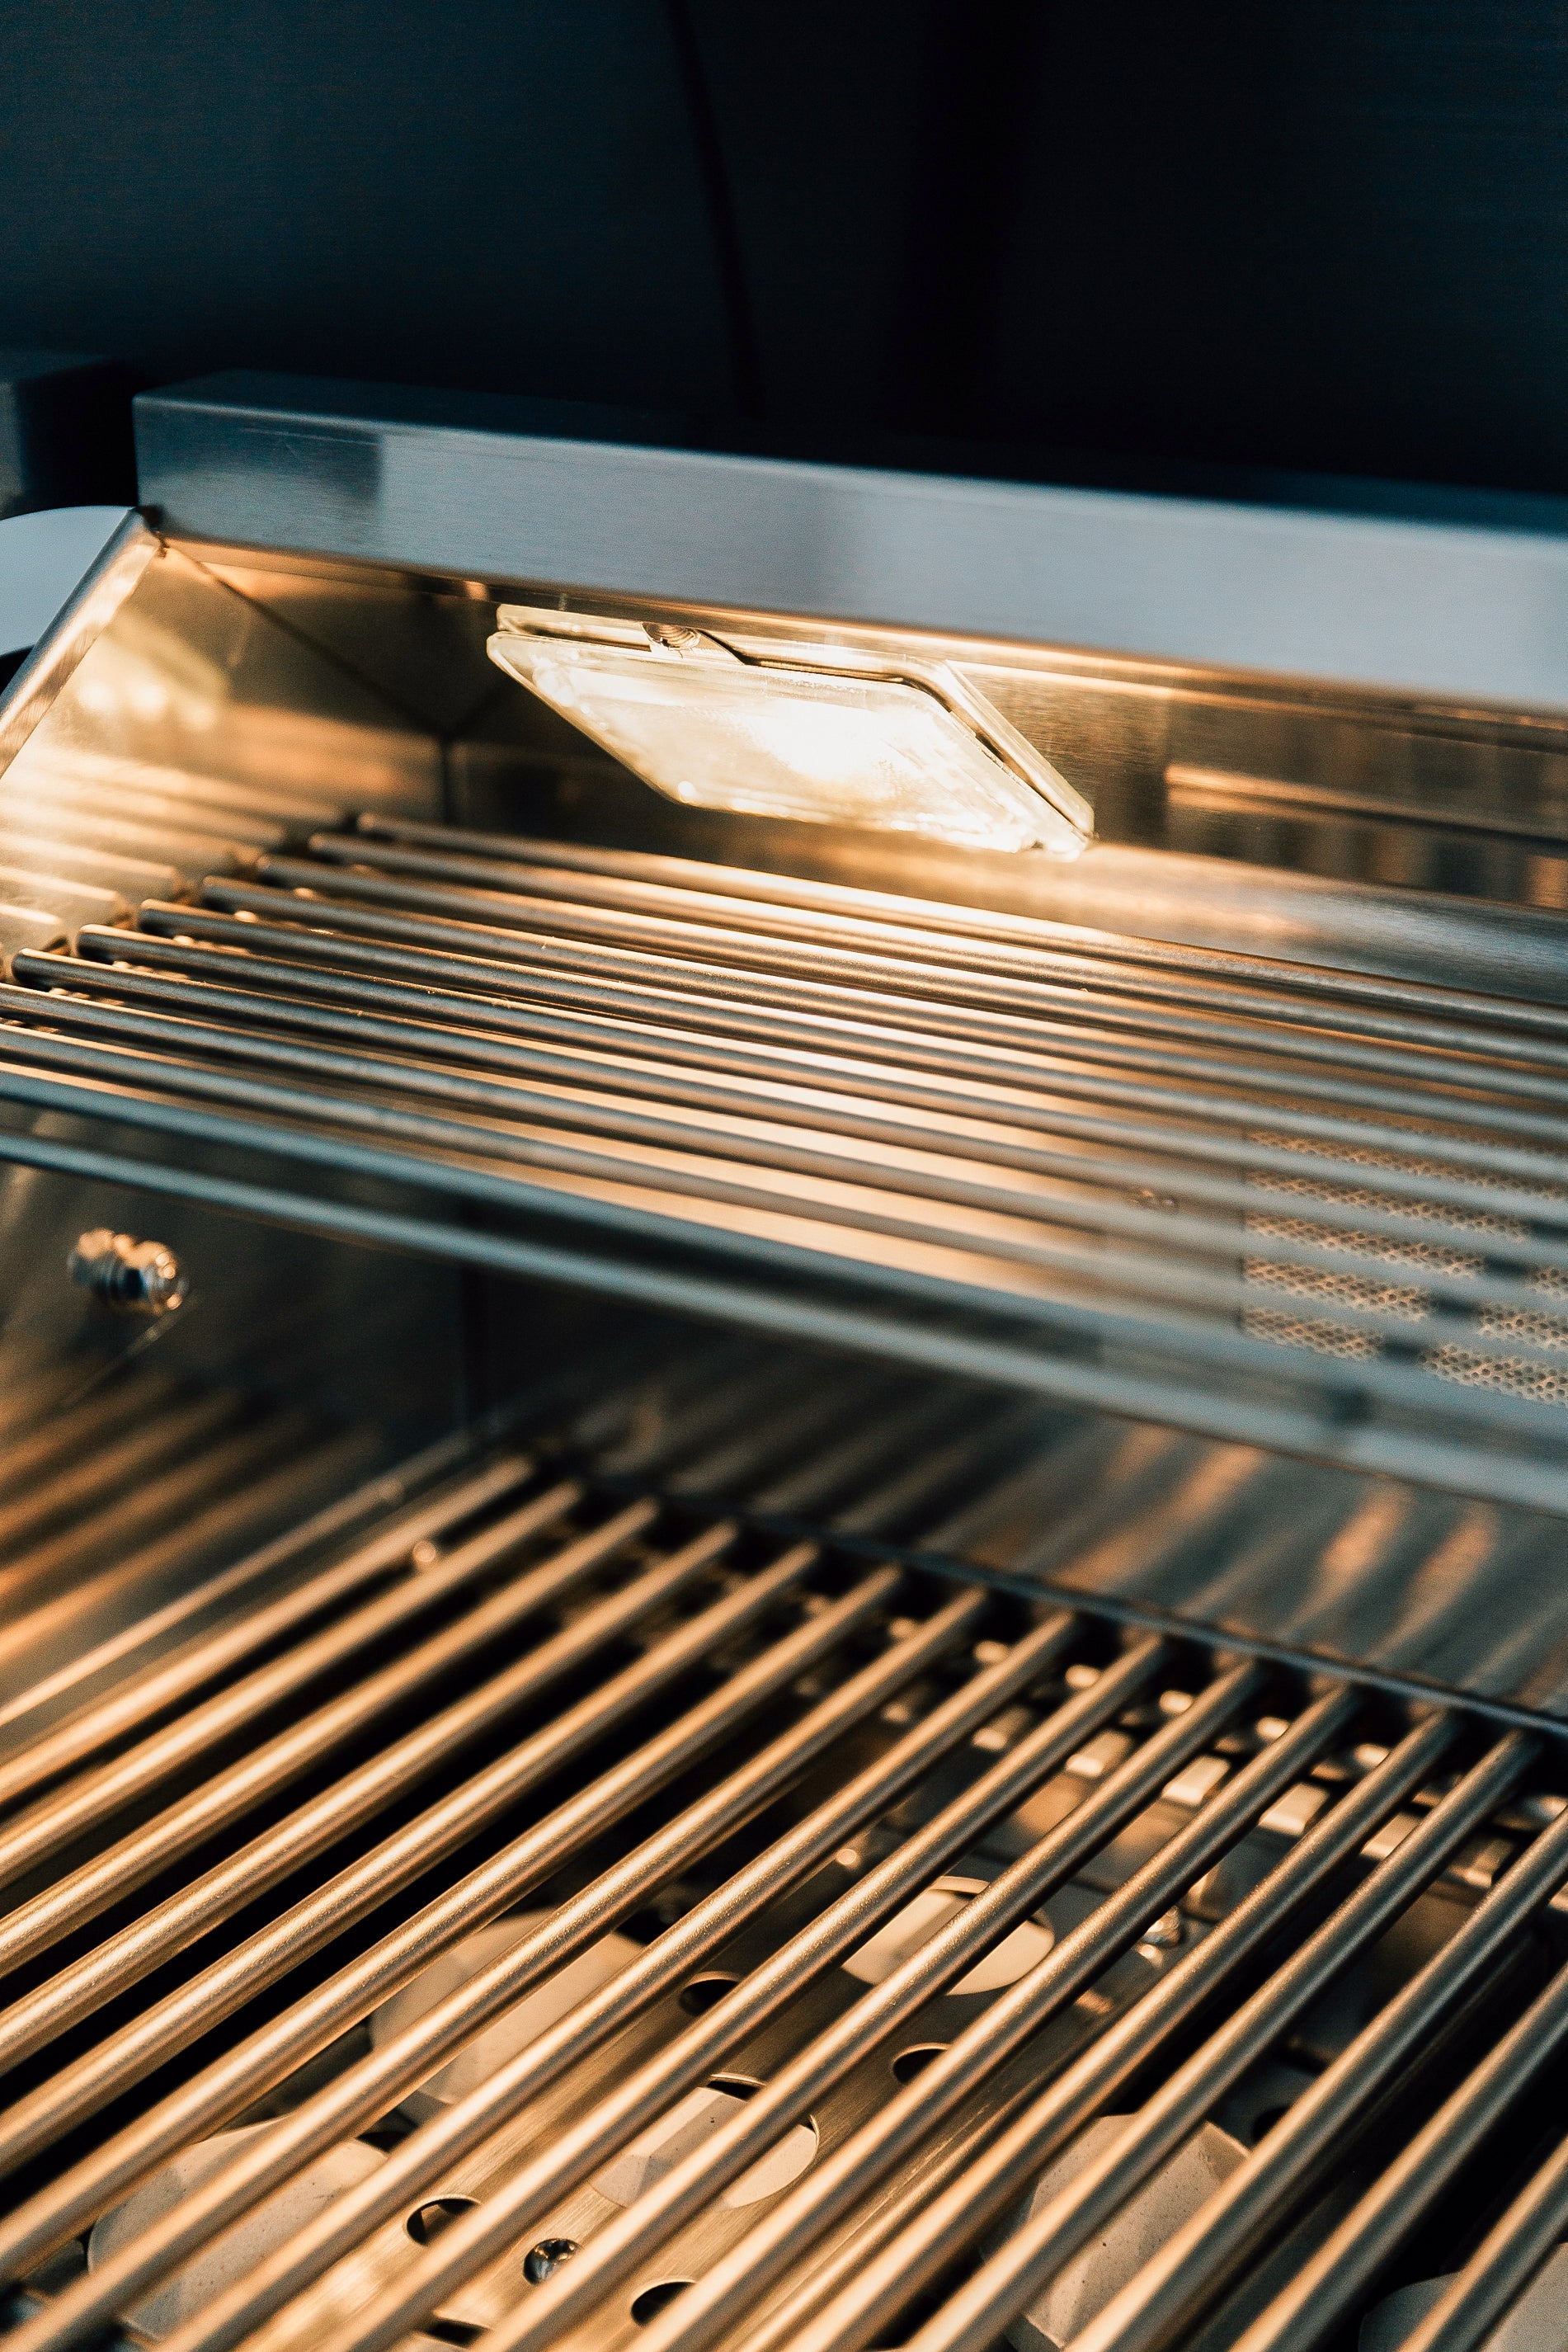 Summerset Sizzler Pro Series Built-in Grill